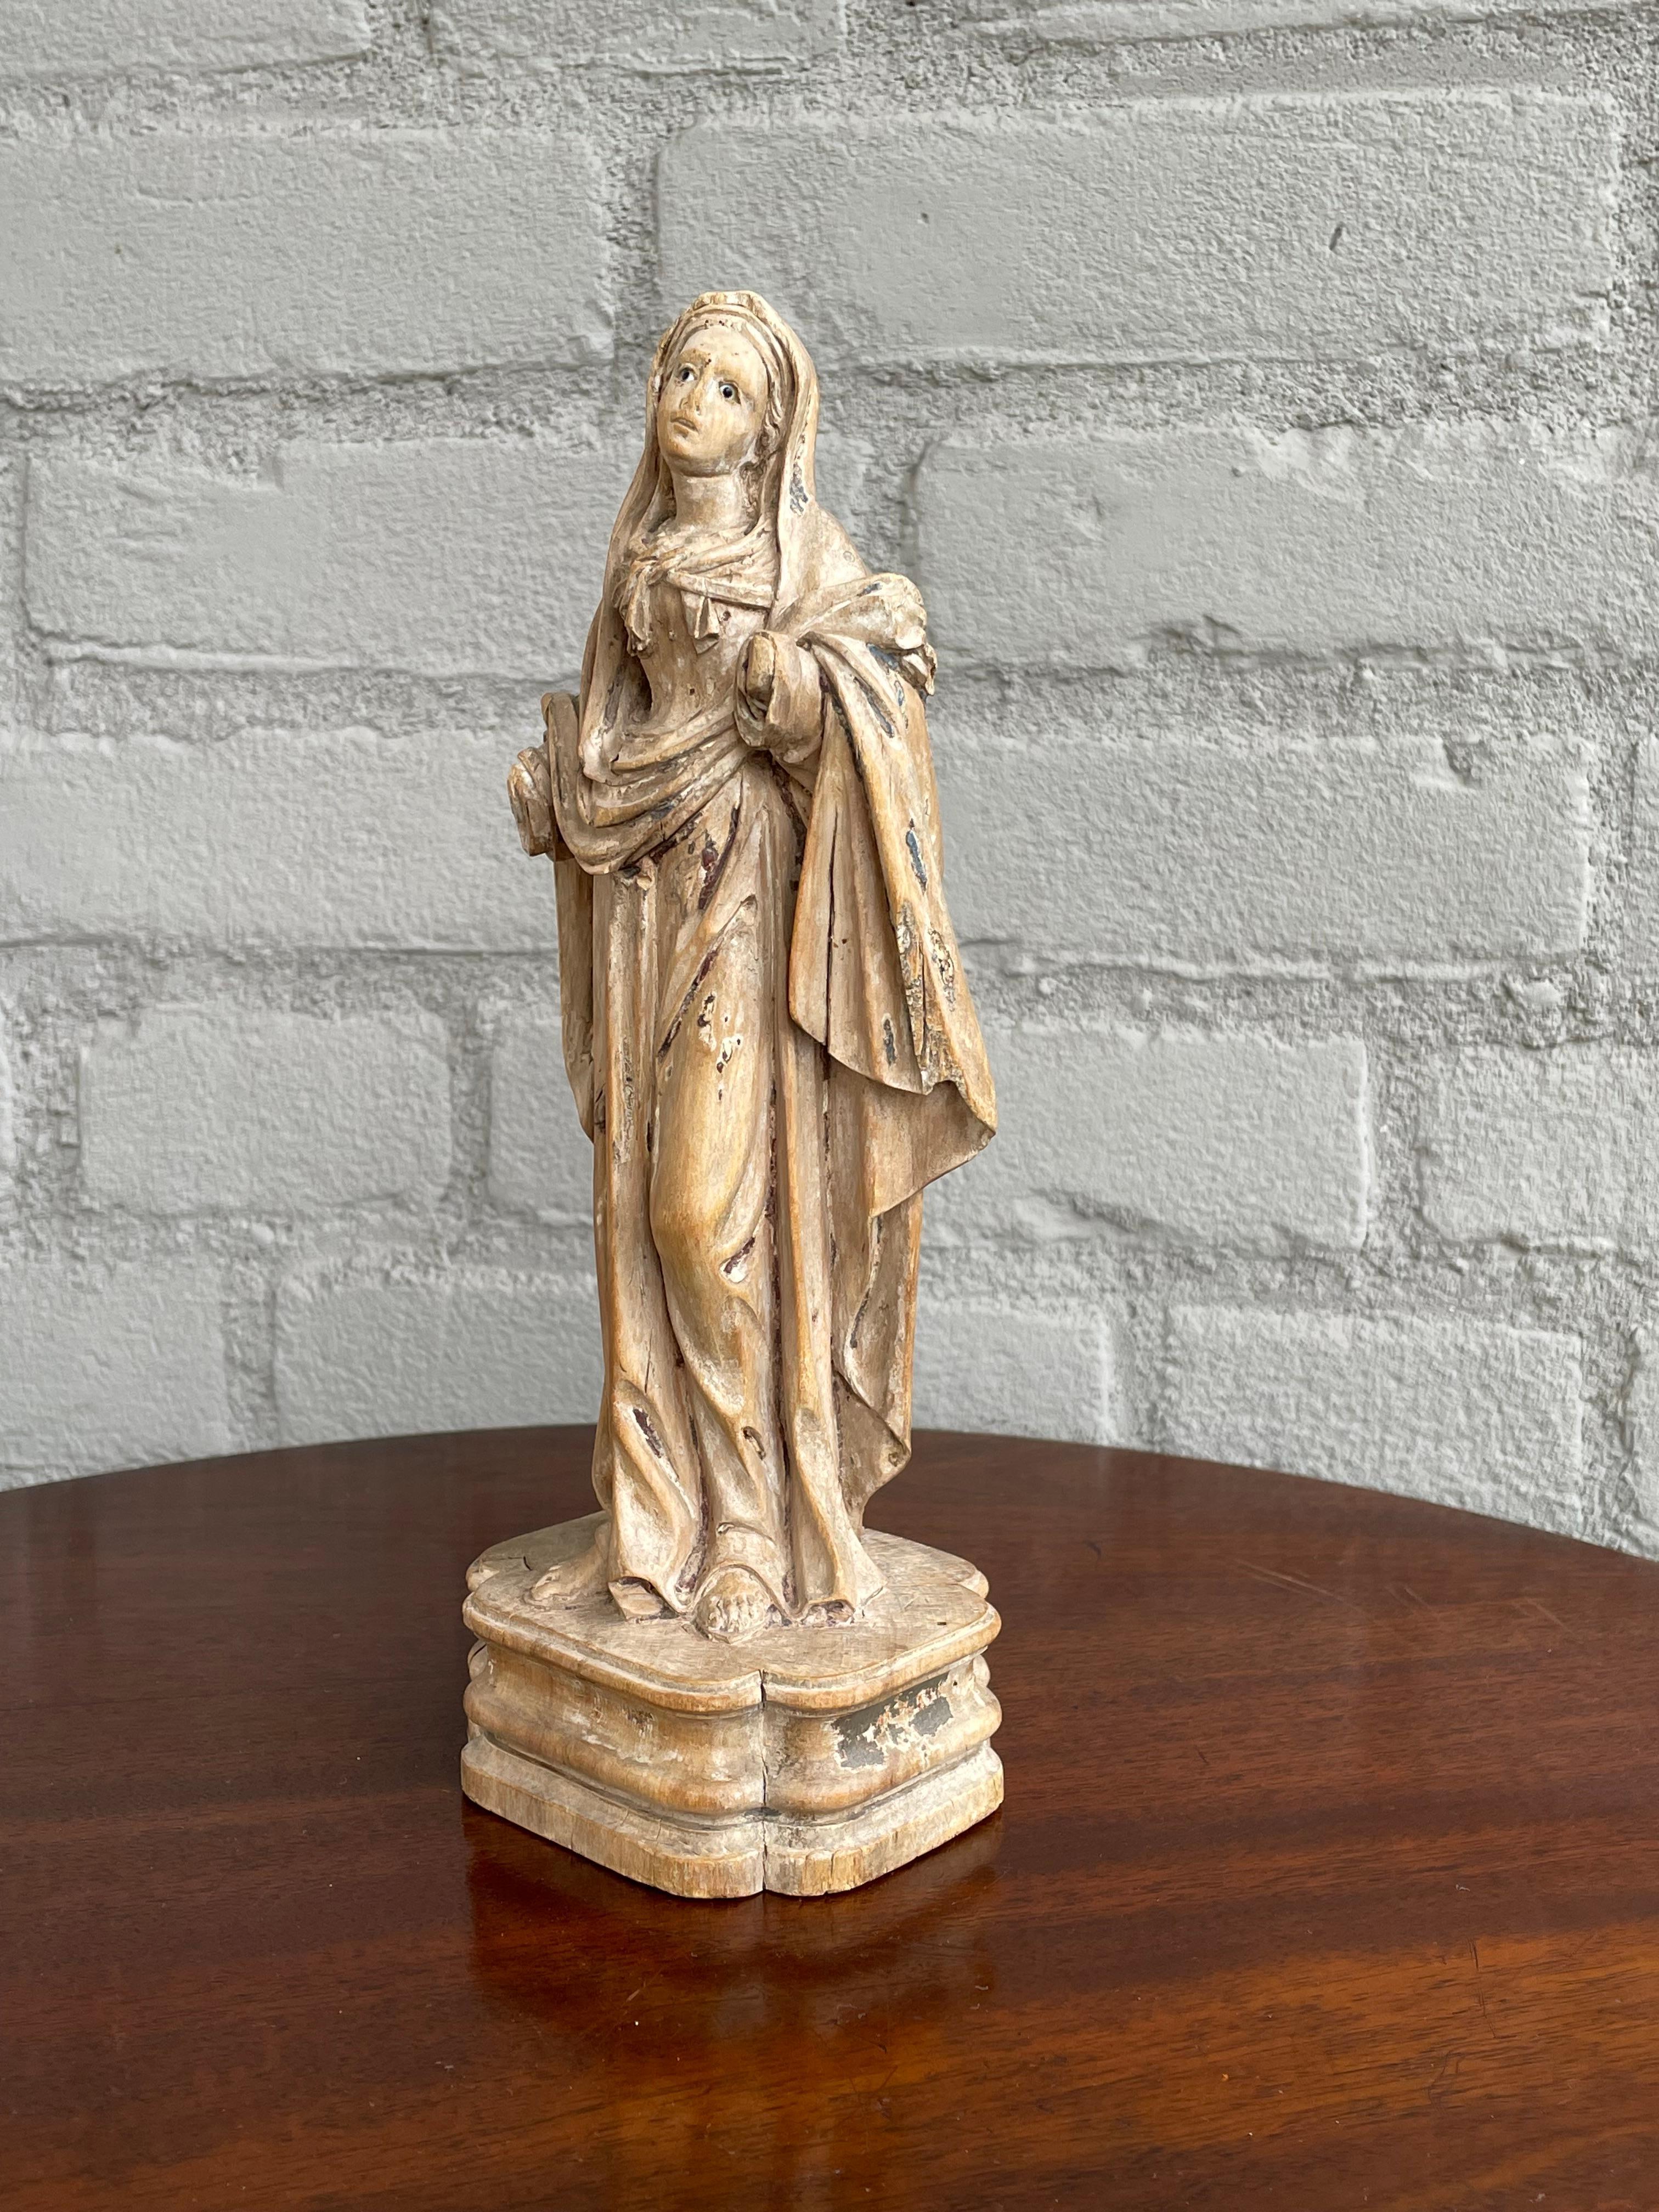 Late 1600s or early 1700s palmwood statuette of Mary Magdalene, extremely rare.

Over the centuries the ideas about Mary Magdalene and her role in the life of Christ seem to have changed constantly and still are. To us, she stands for the